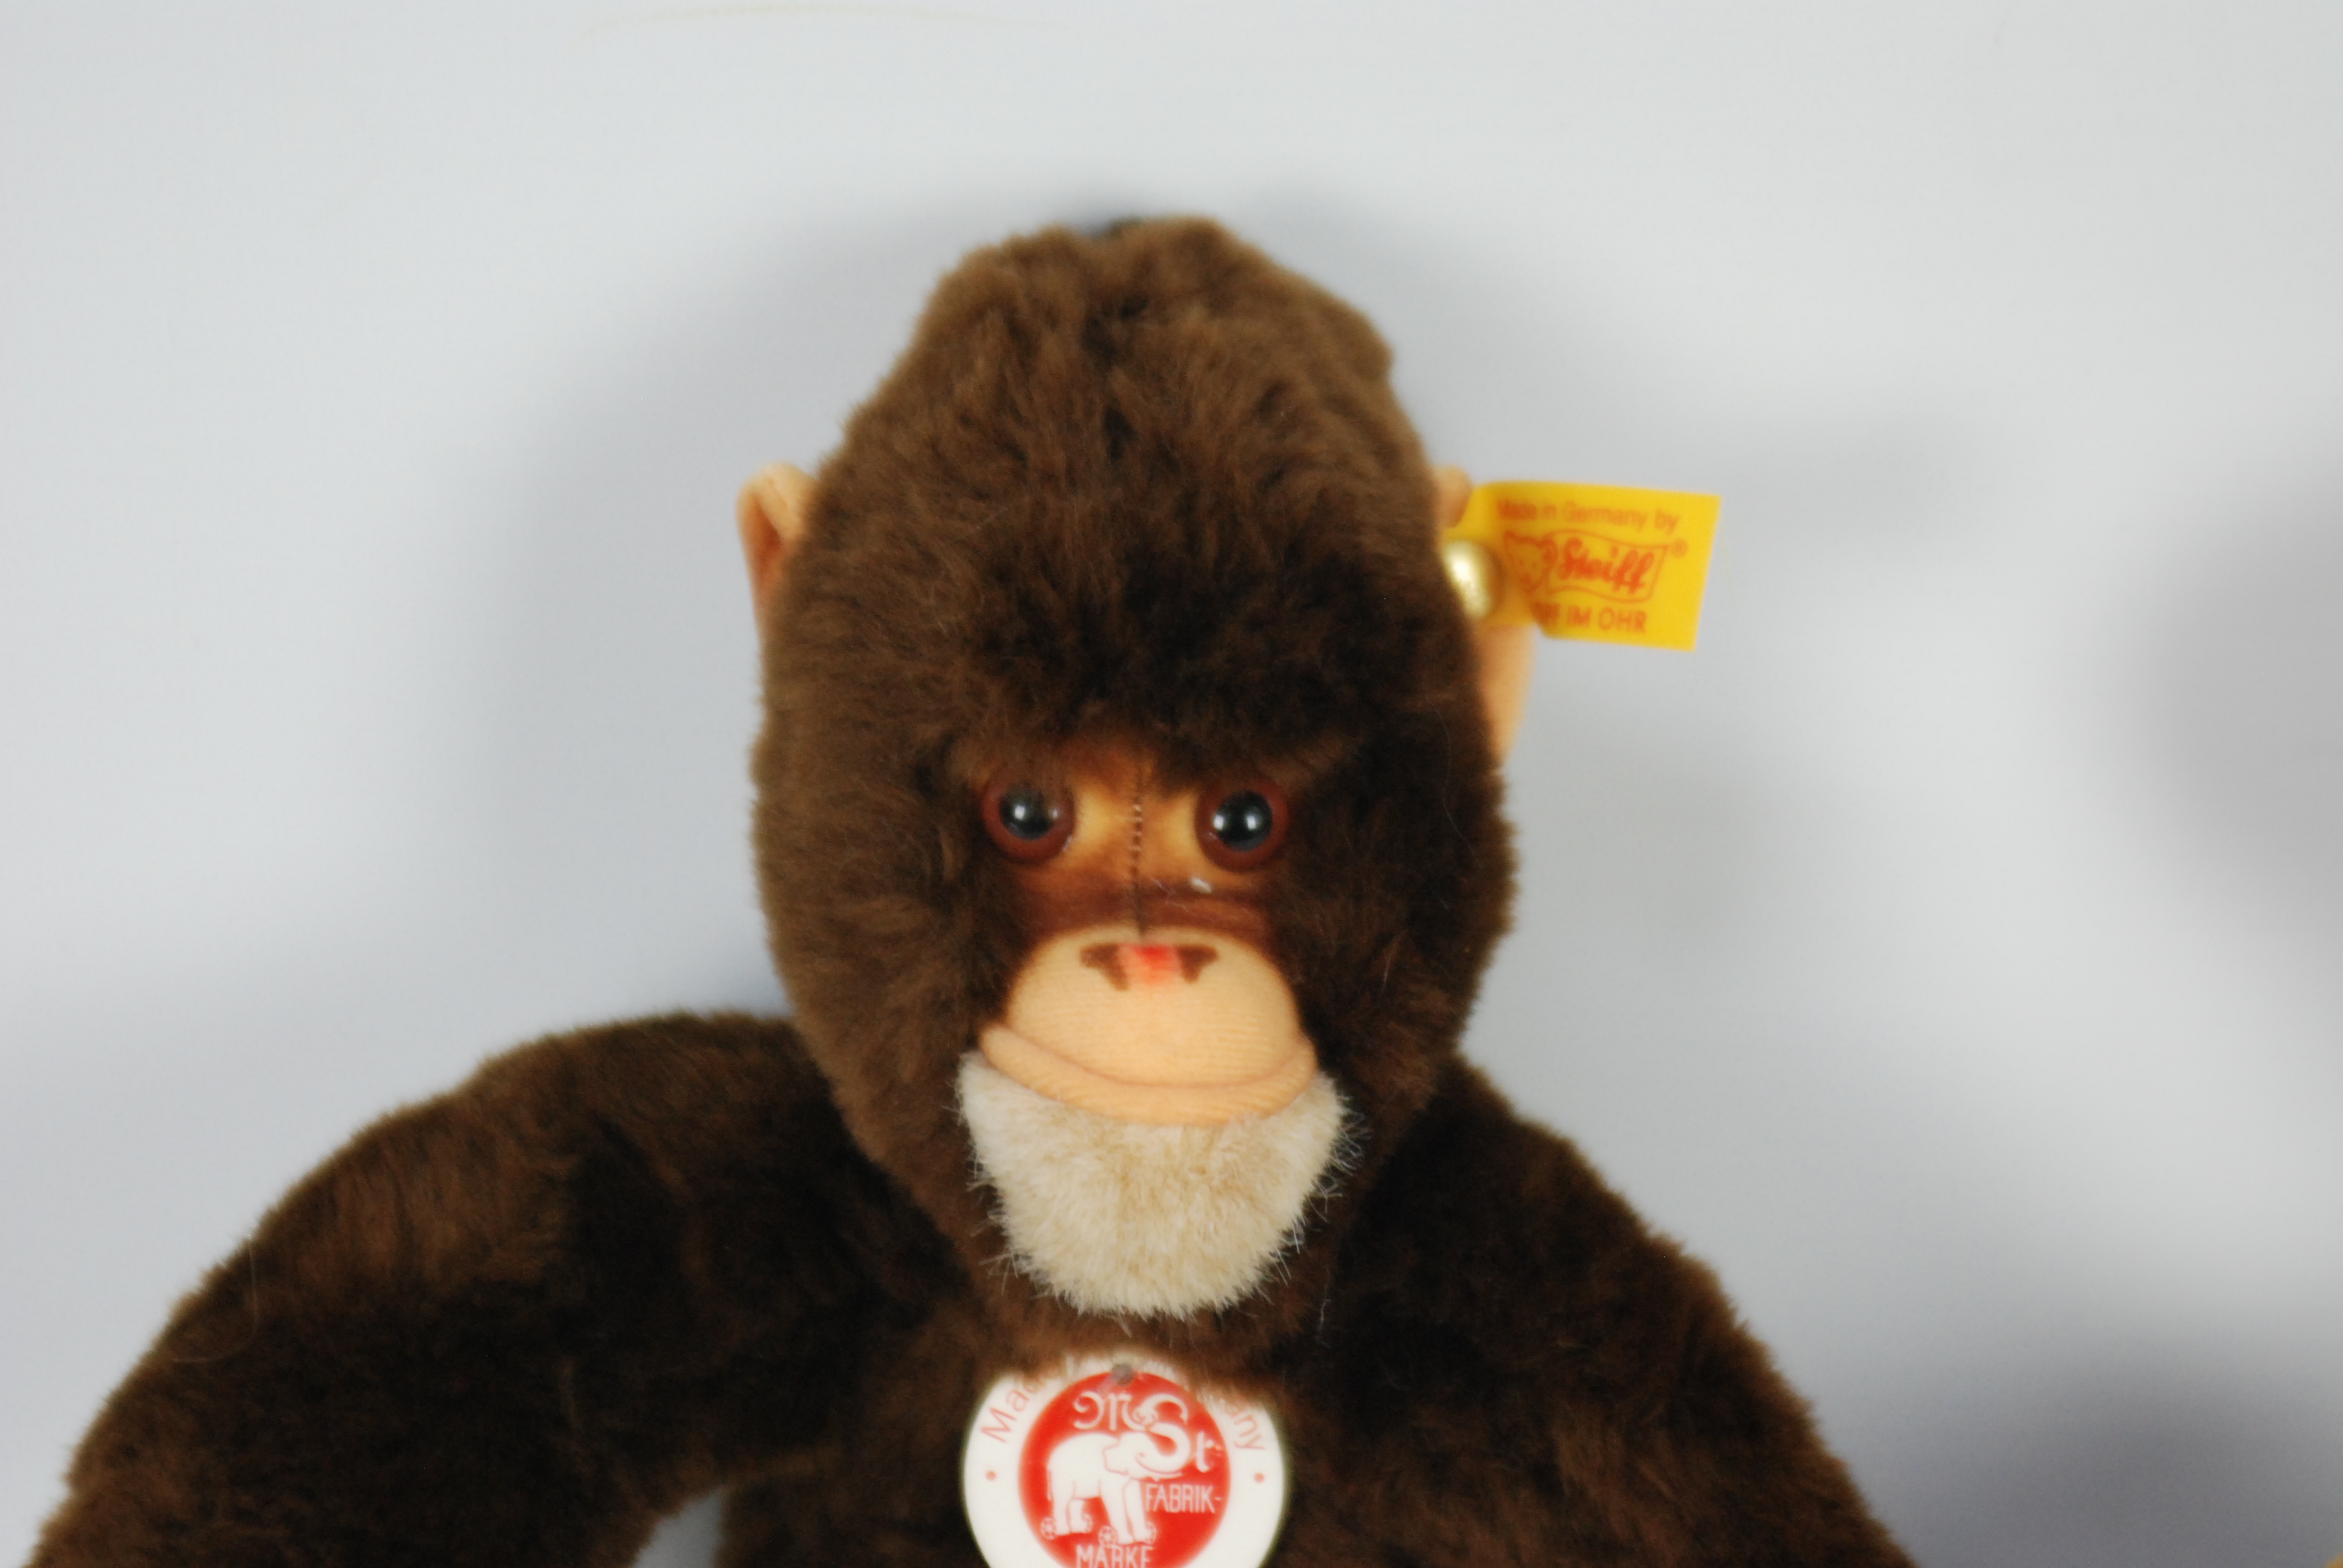 Steiff - Two Steiff bears - Lot includes a 'Jocko' monkey with yellow tag on its ear. - Image 3 of 6